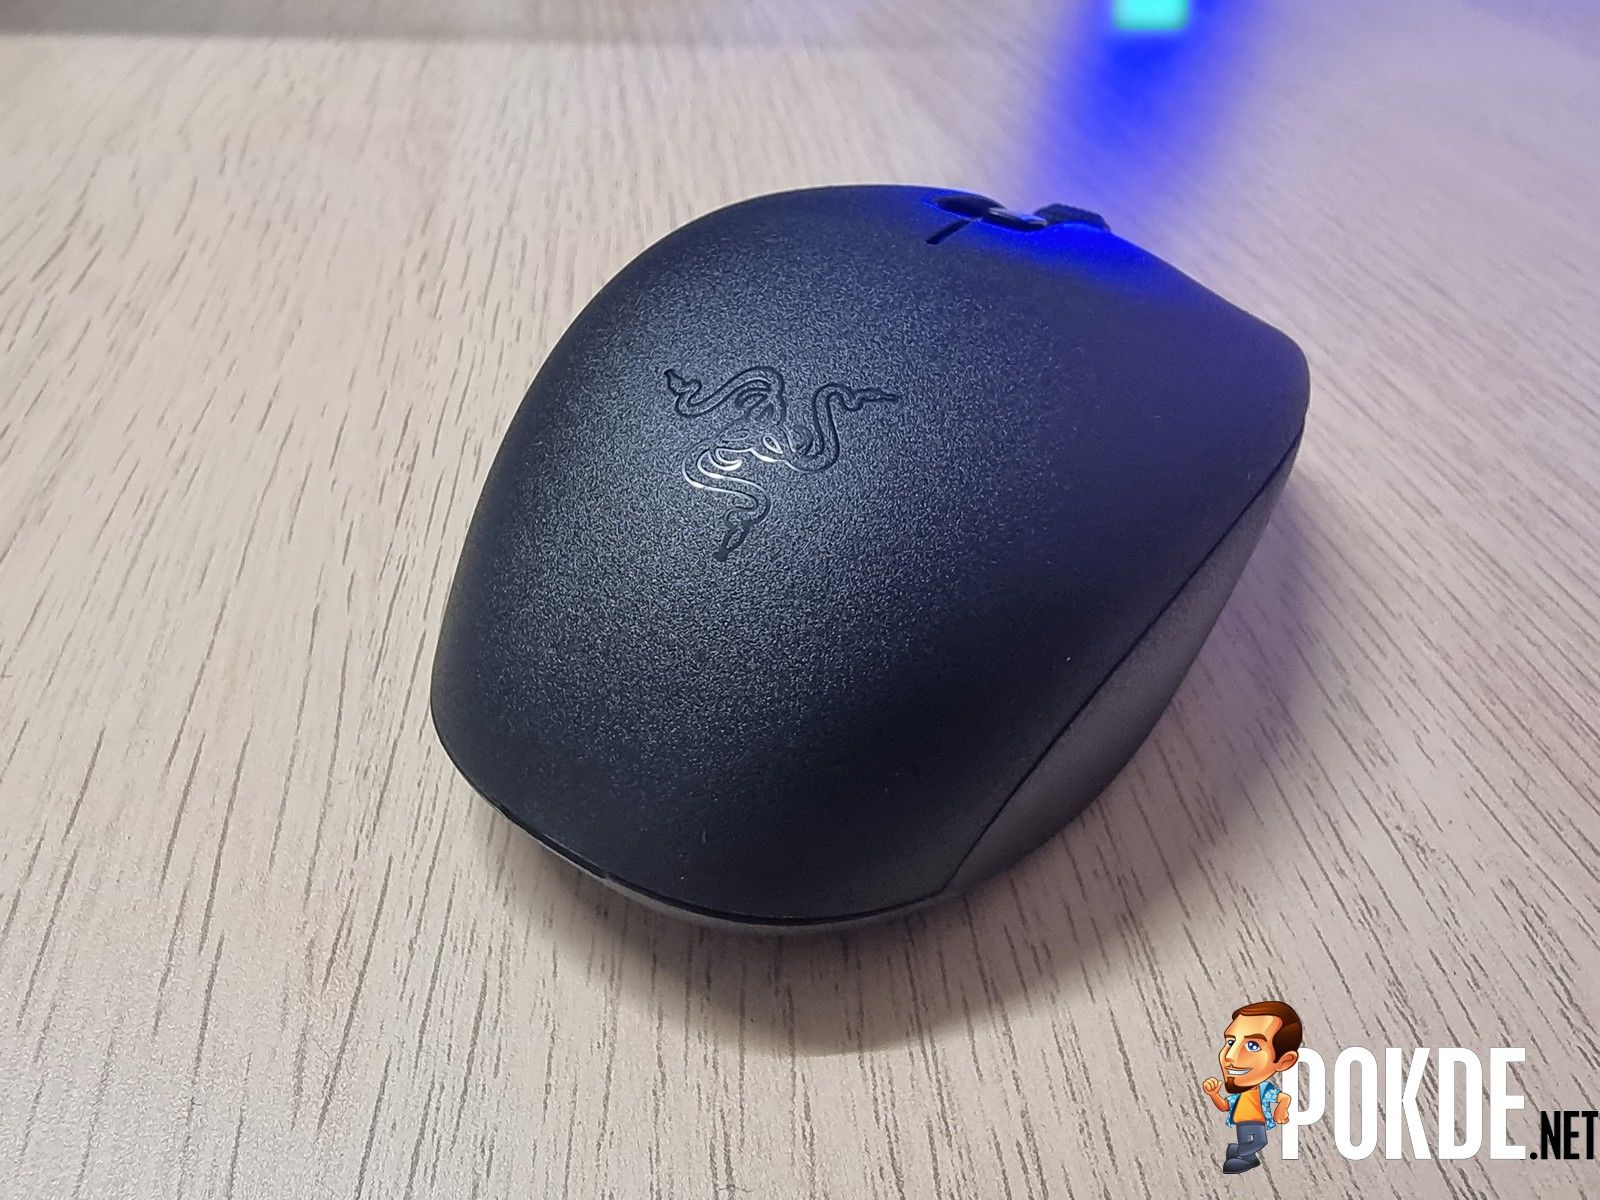 Watch BEFORE Buying This Mouse! Orochi v2 Long Term Review 